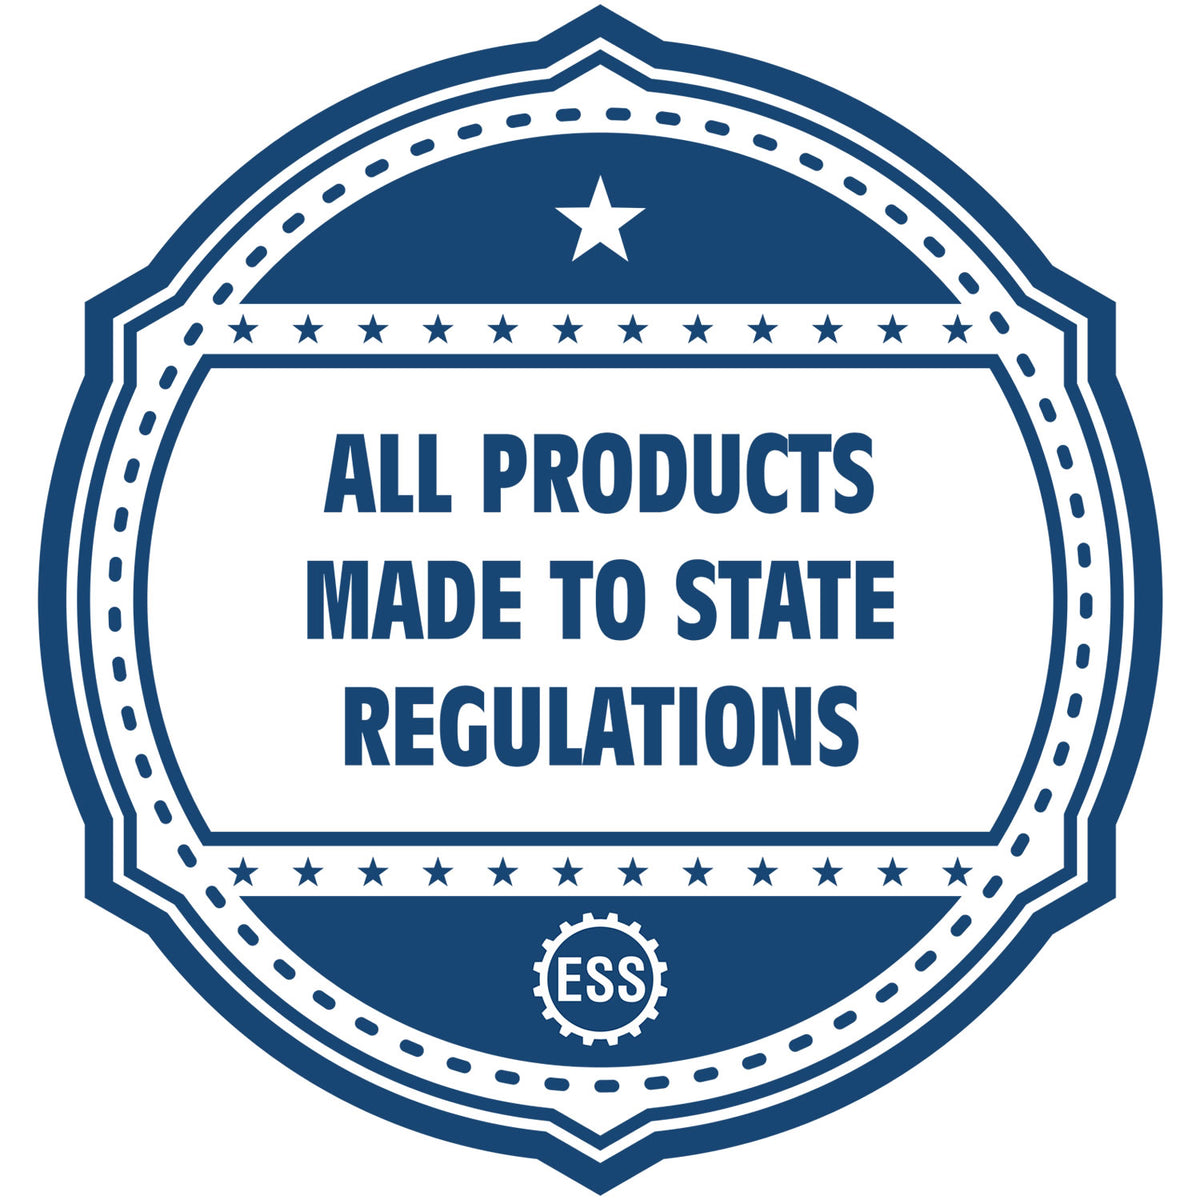 An icon or badge element for the State of Georgia Long Reach Architectural Embossing Seal showing that this product is made in compliance with state regulations.